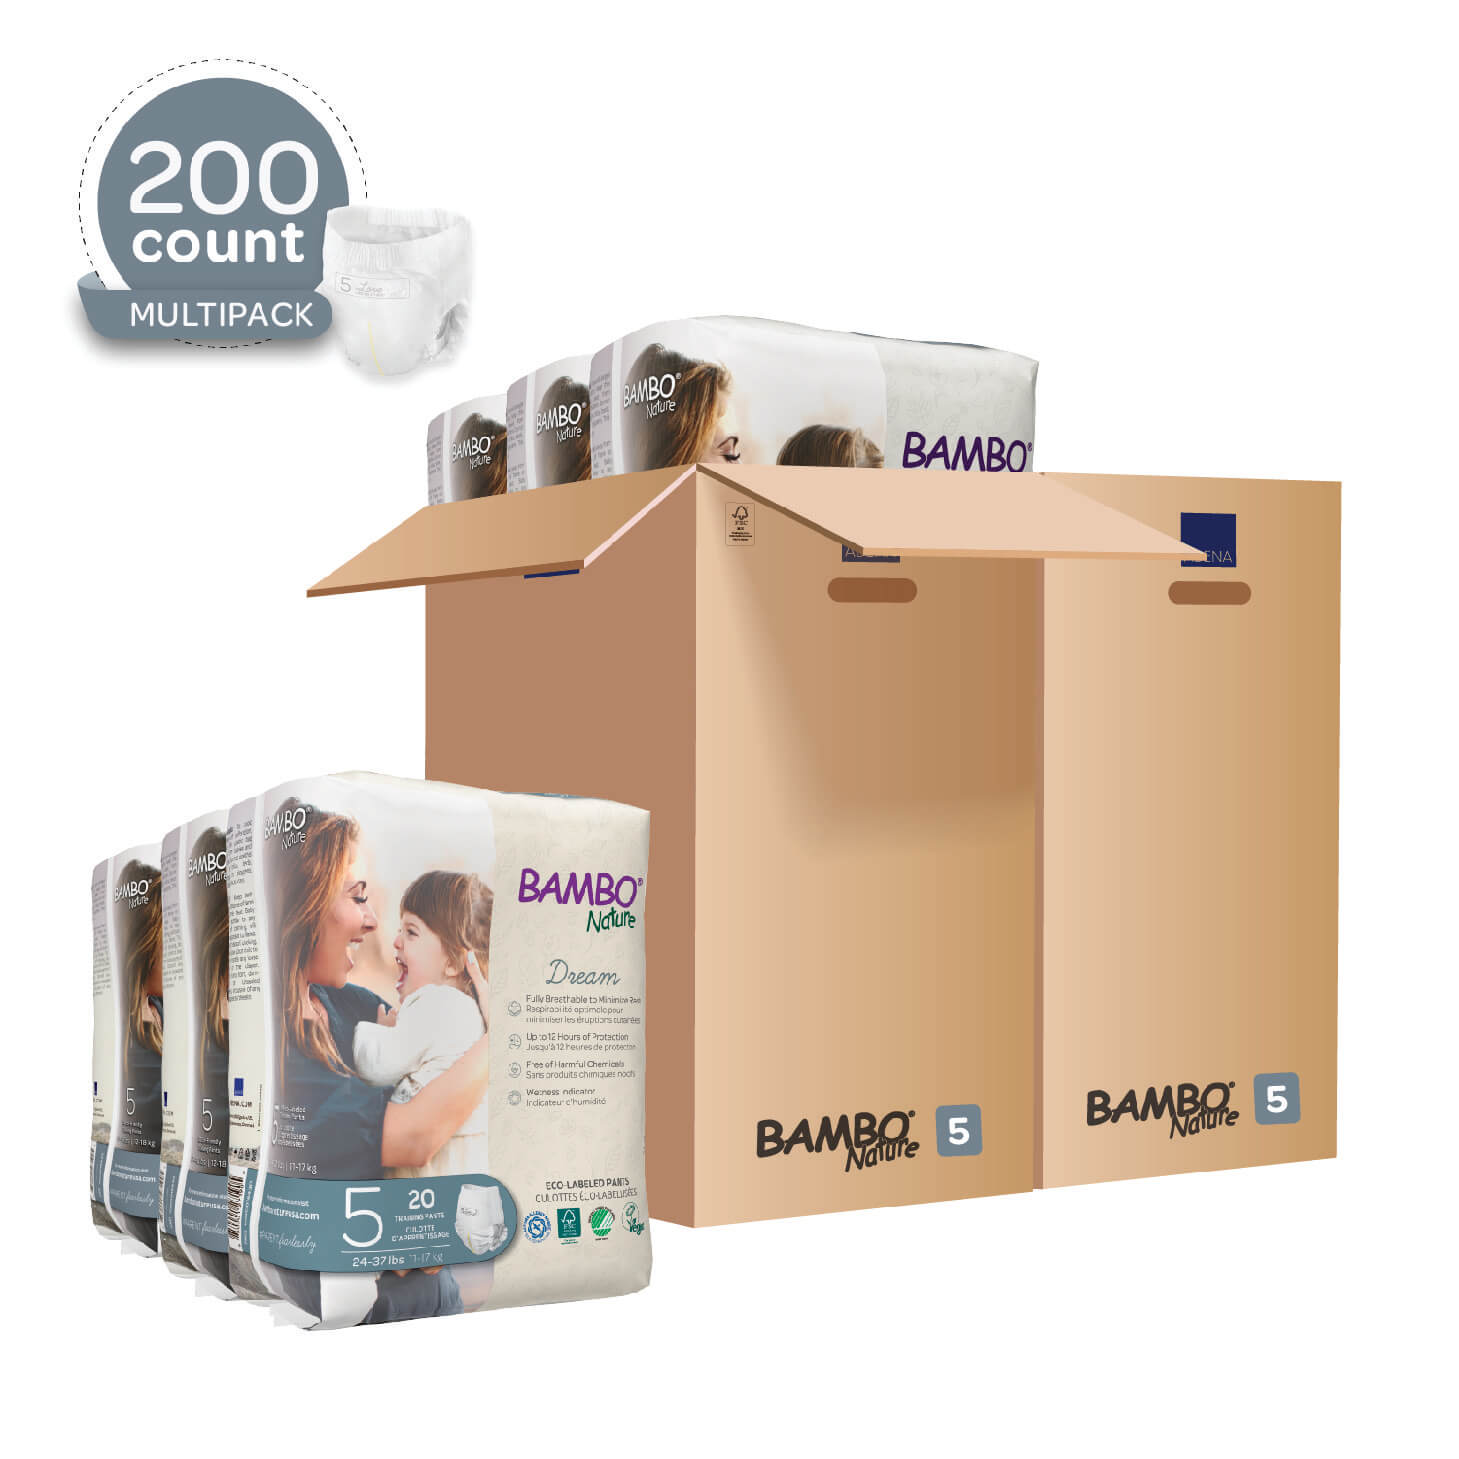 Adult Diapers Incontinence Briefs Medium, 200 Pack Double Case